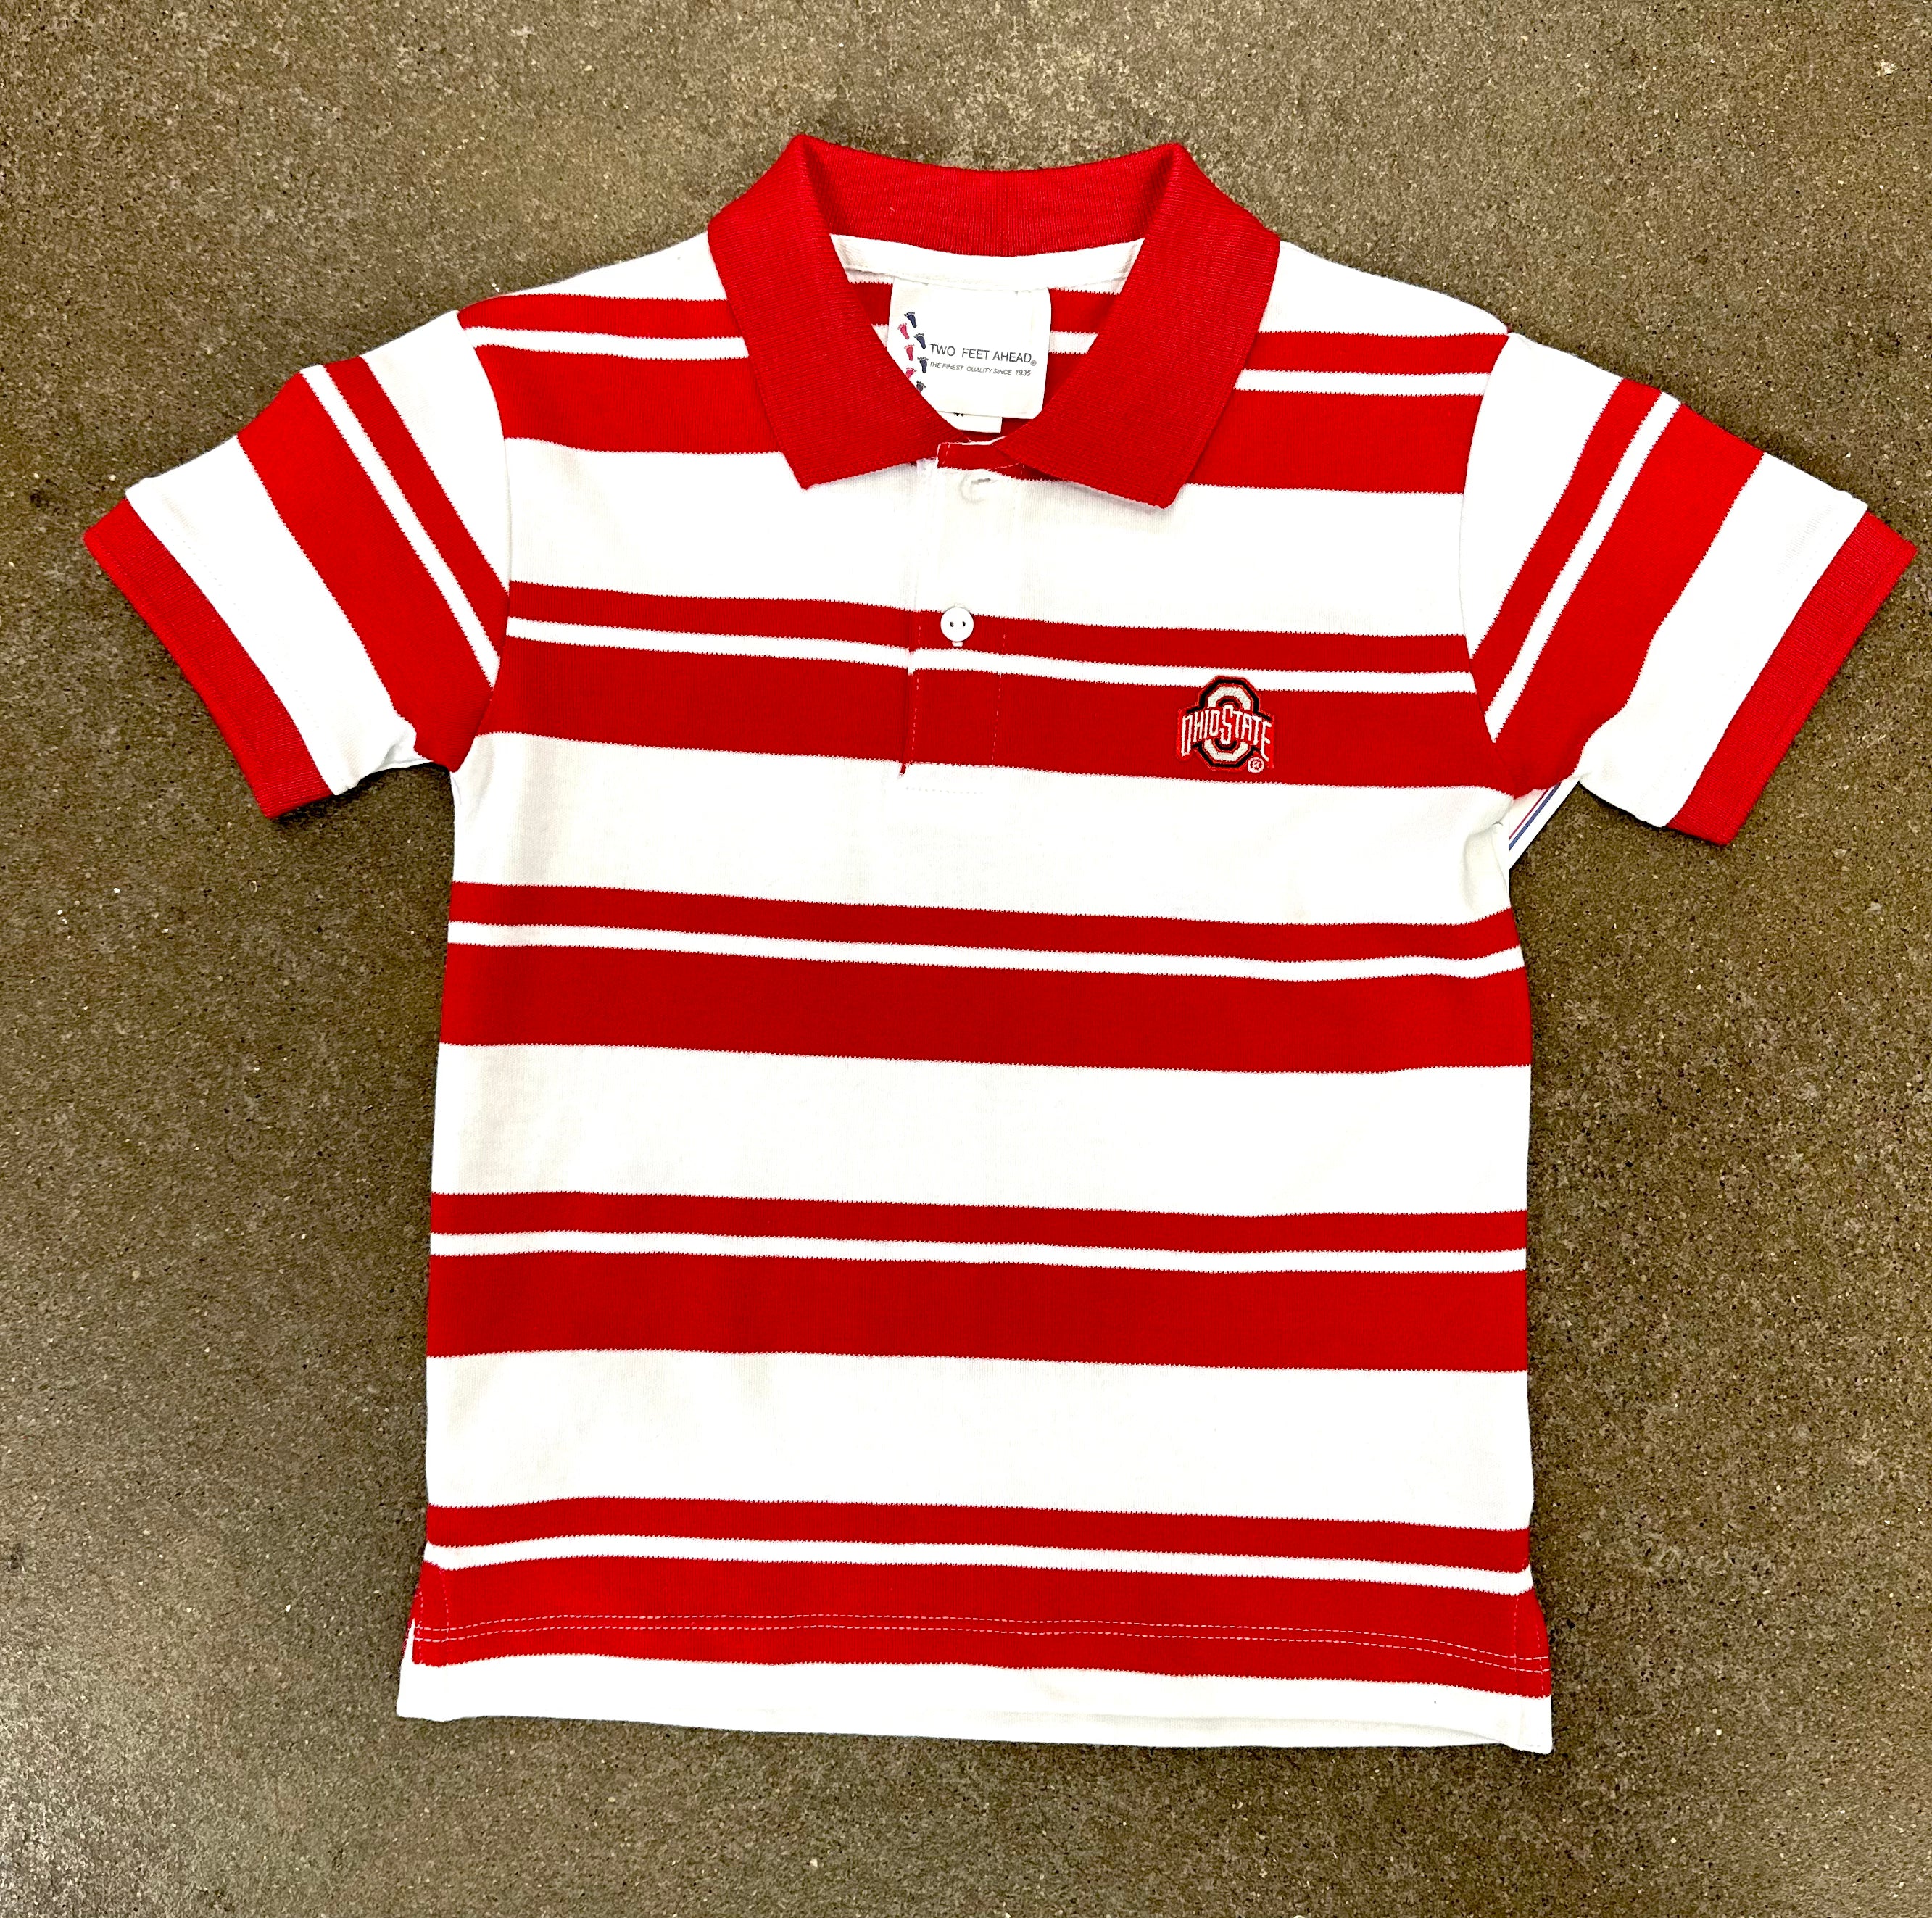 INFANT & TODDLER OHIO STATE BUCKEYE Rugby Golf Shirt by 2 Feet Ahead